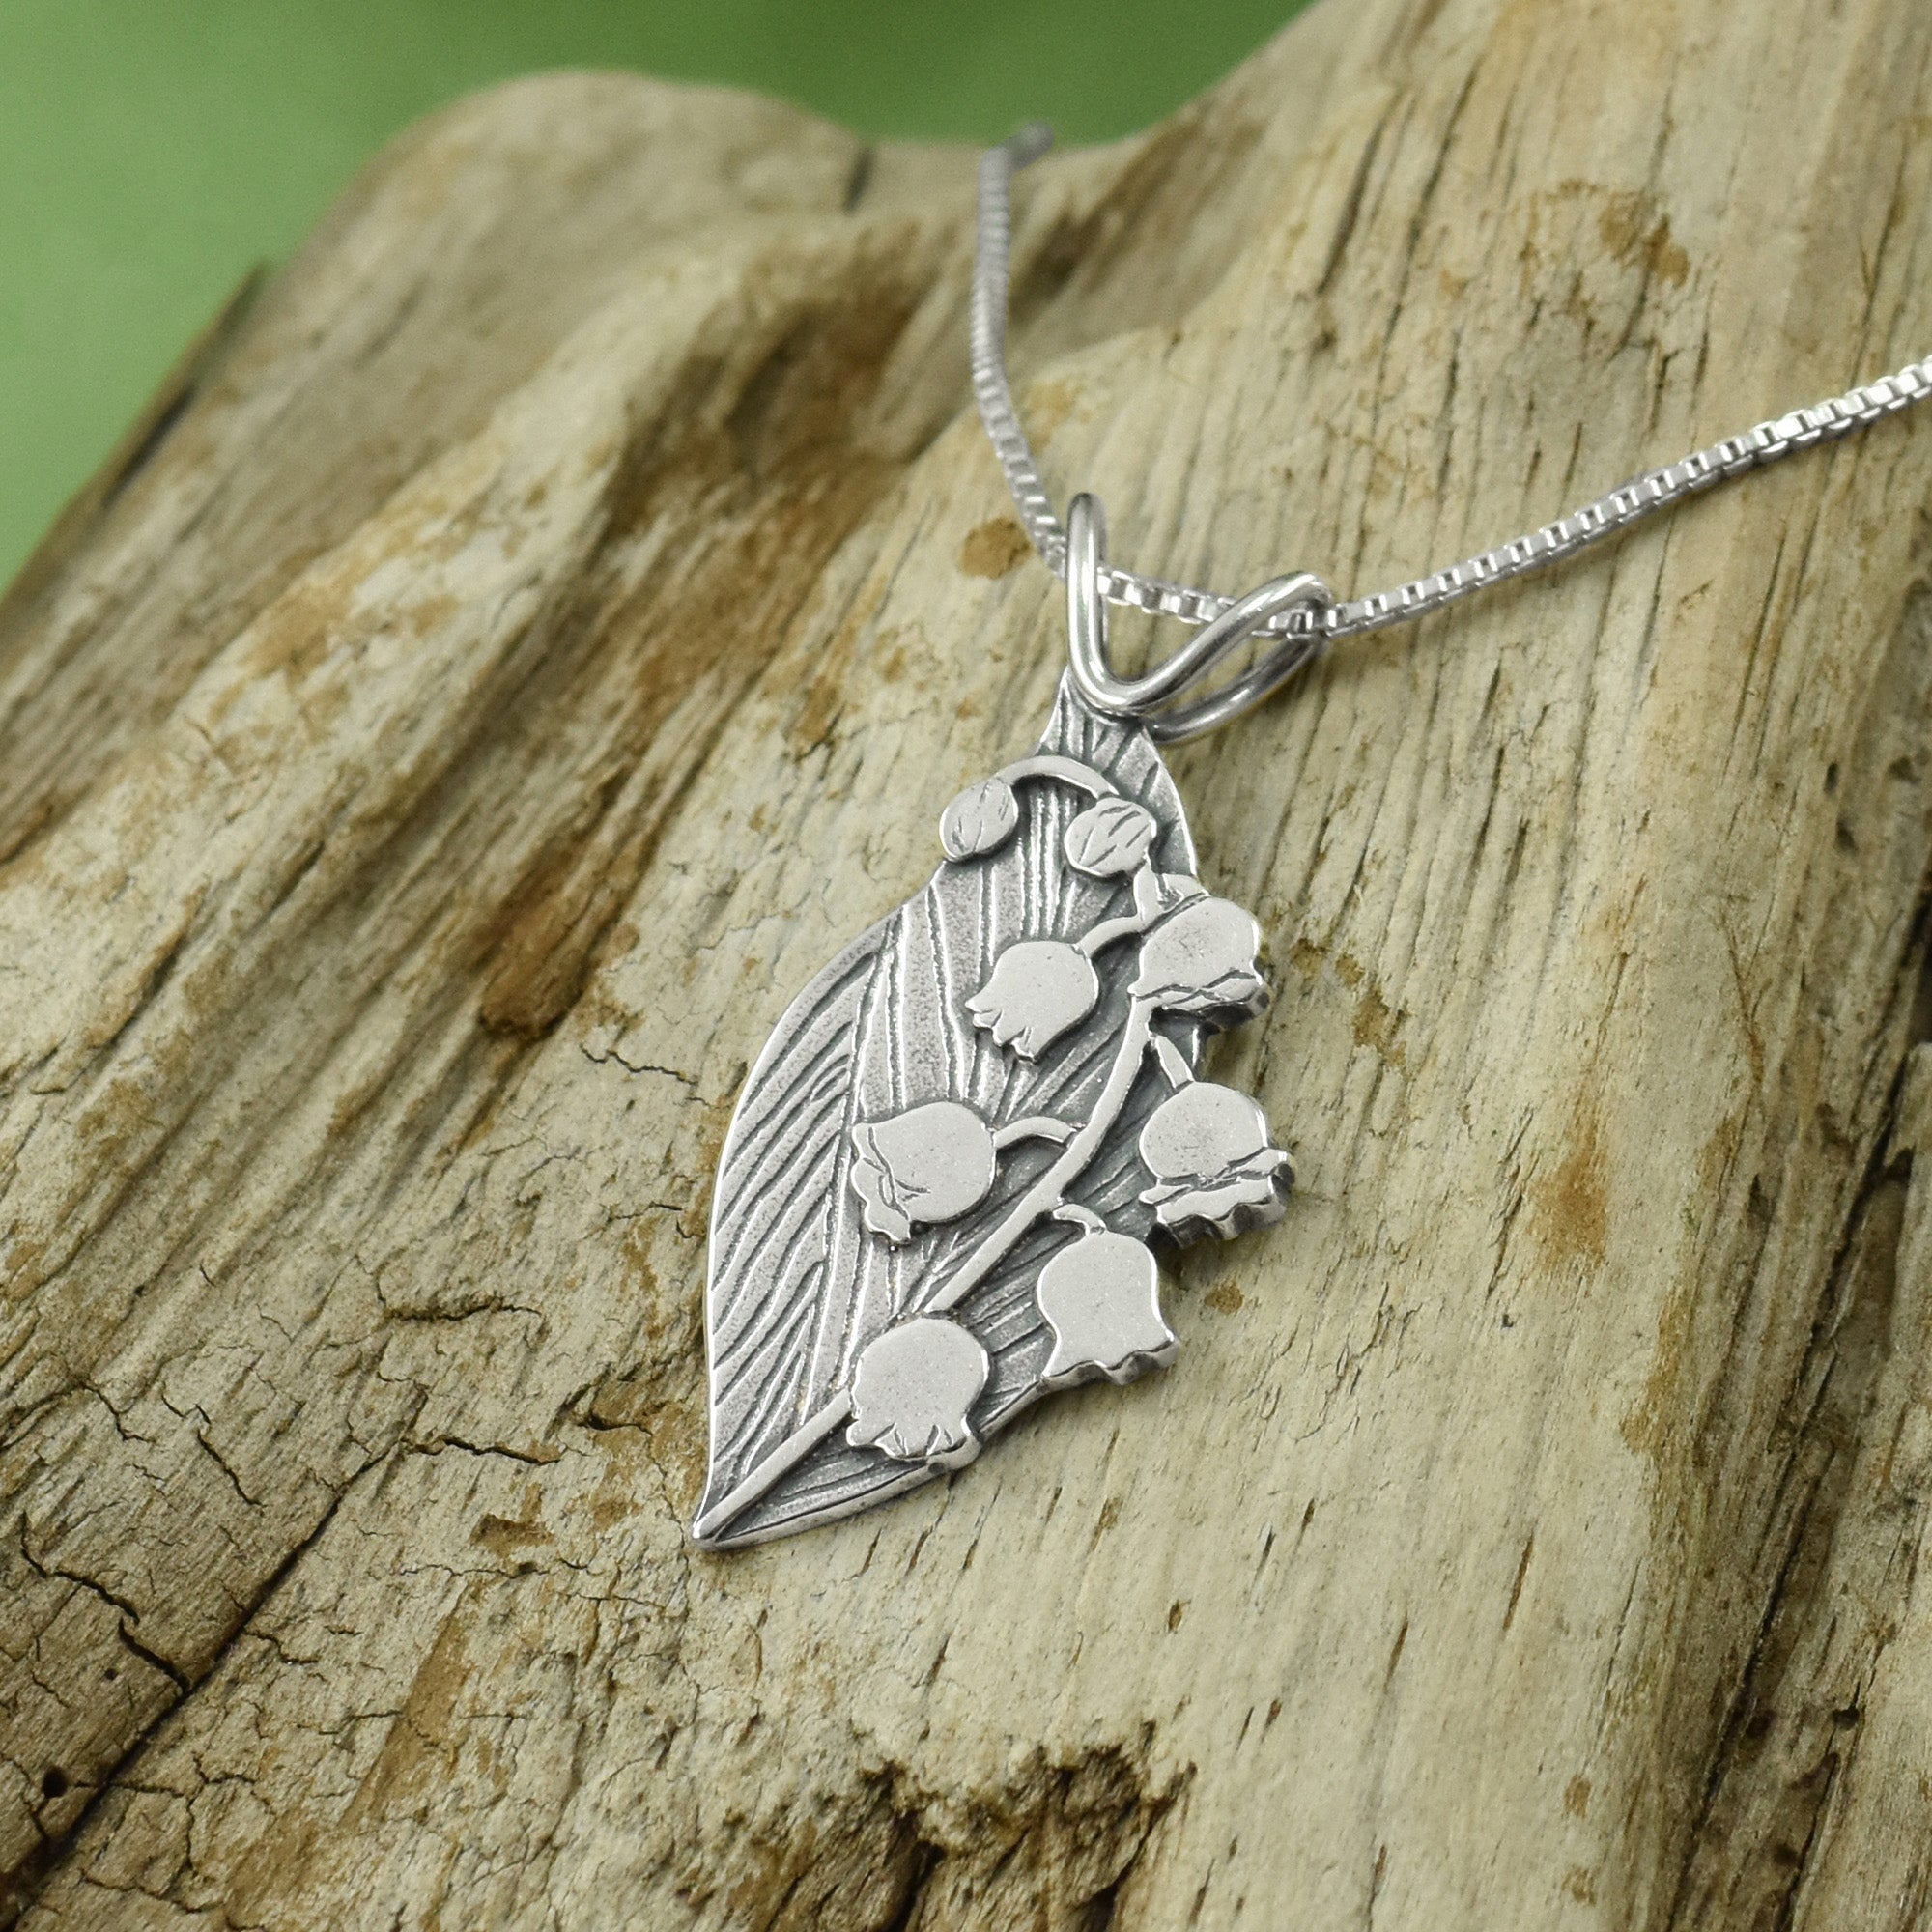 Traditional Design Sterling Silver Necklace Pendant Handmade Jewellery -  Etsy | German silver jewelry, Pendant, Silver jewelry handmade